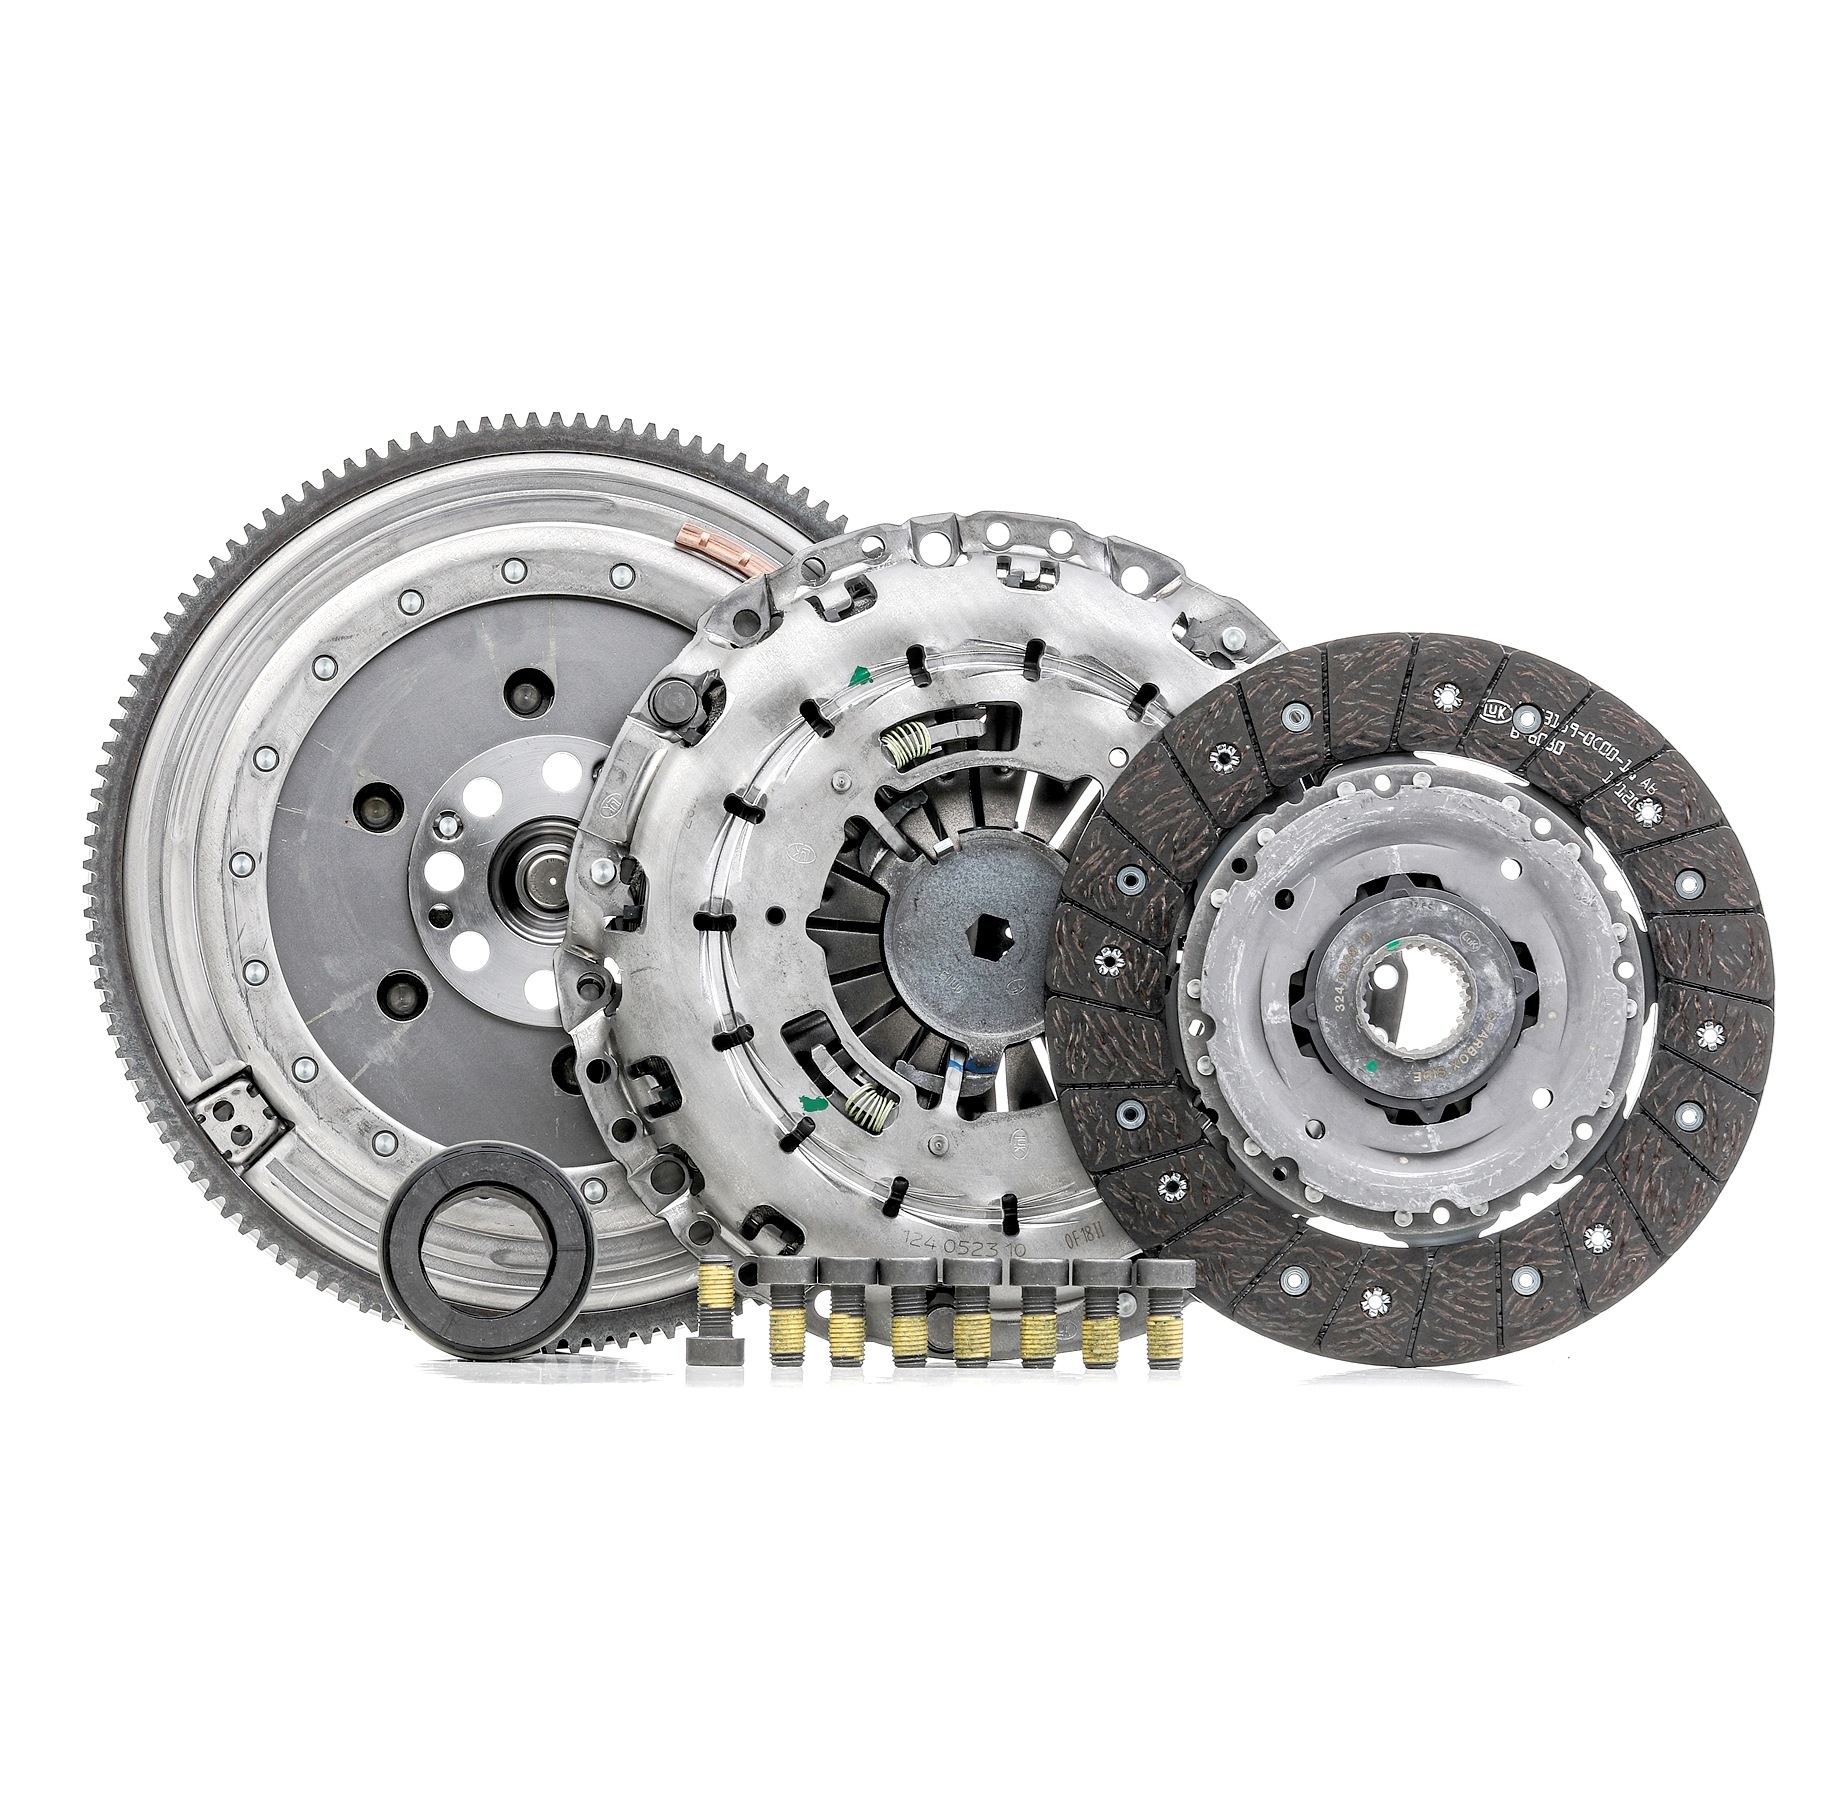 LuK 600 0298 00 Clutch kit with pilot bearing, with clutch release bearing, with release fork, with flywheel, with screw set, Dual-mass flywheel without friction control plate, with automatic adjustment